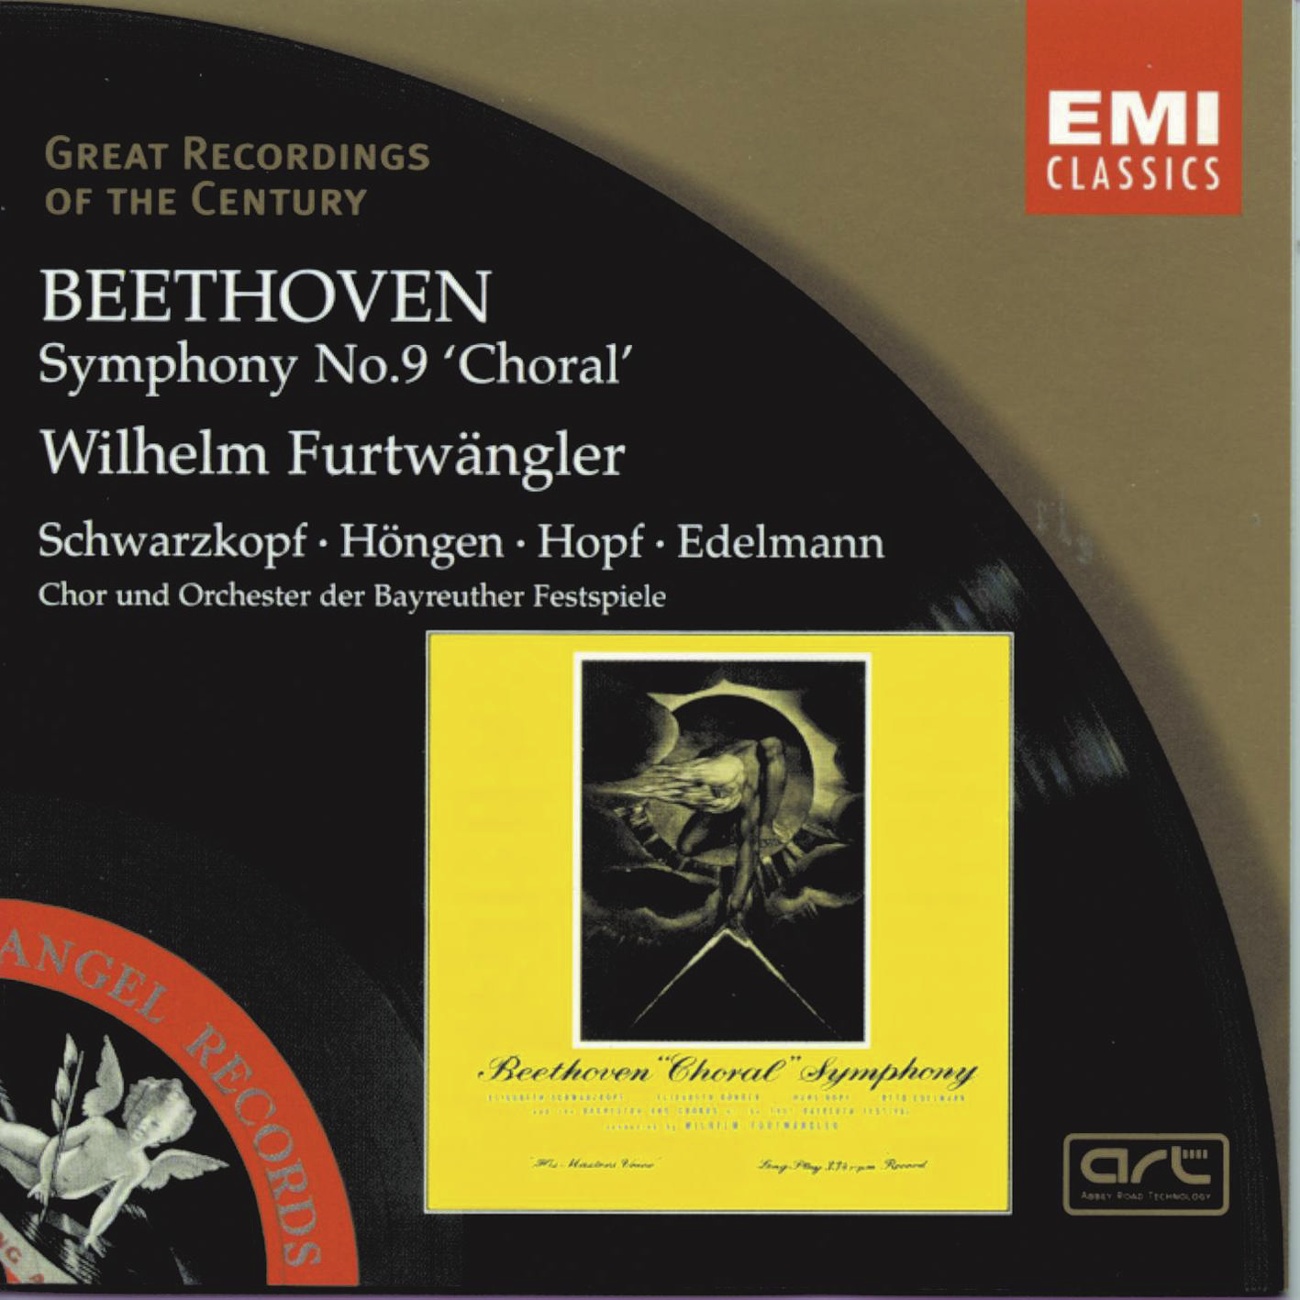 Beethoven: Symphony No. 9 in D Minor, Op. 125, "Choral"